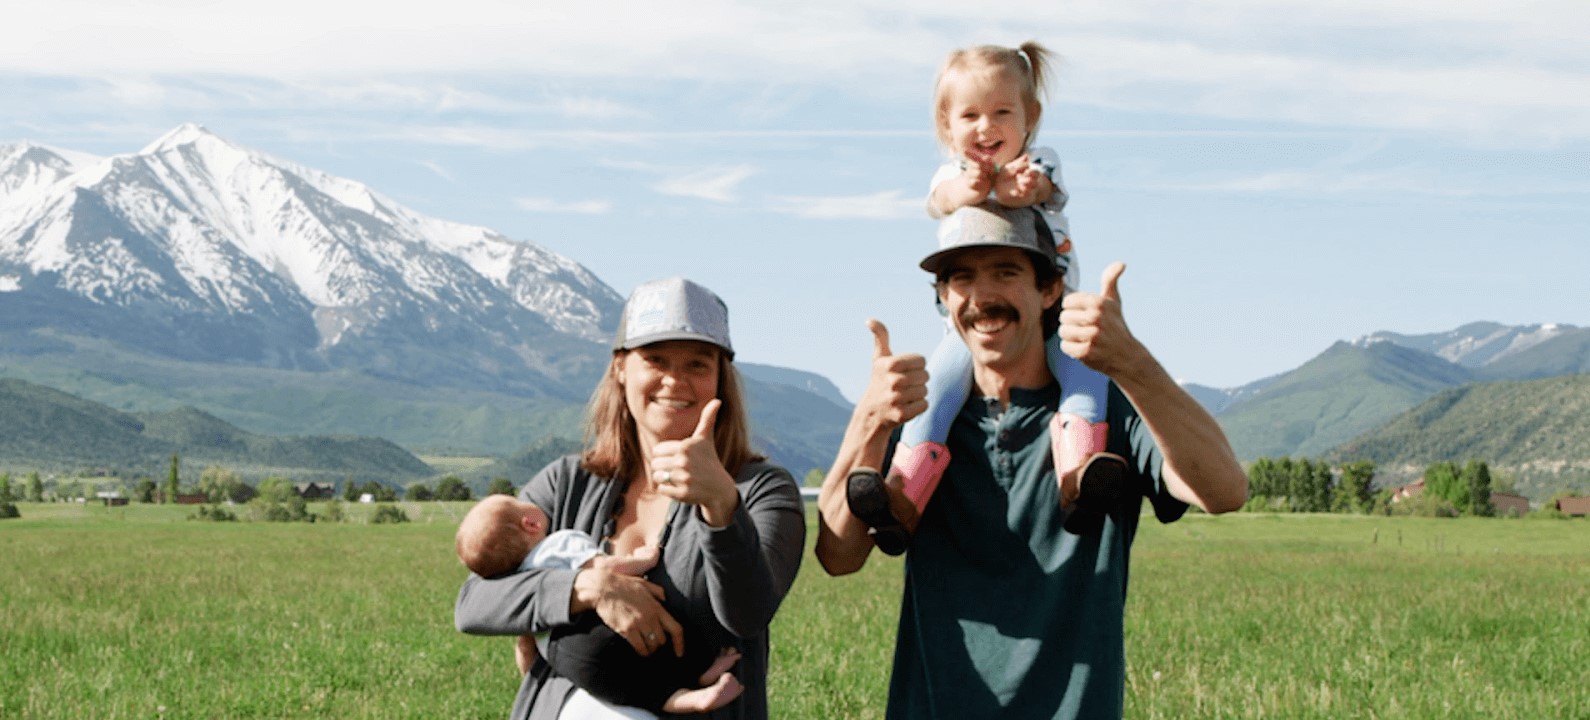 Family of four stands in grass in front of a mountain, advocating for iconic winters